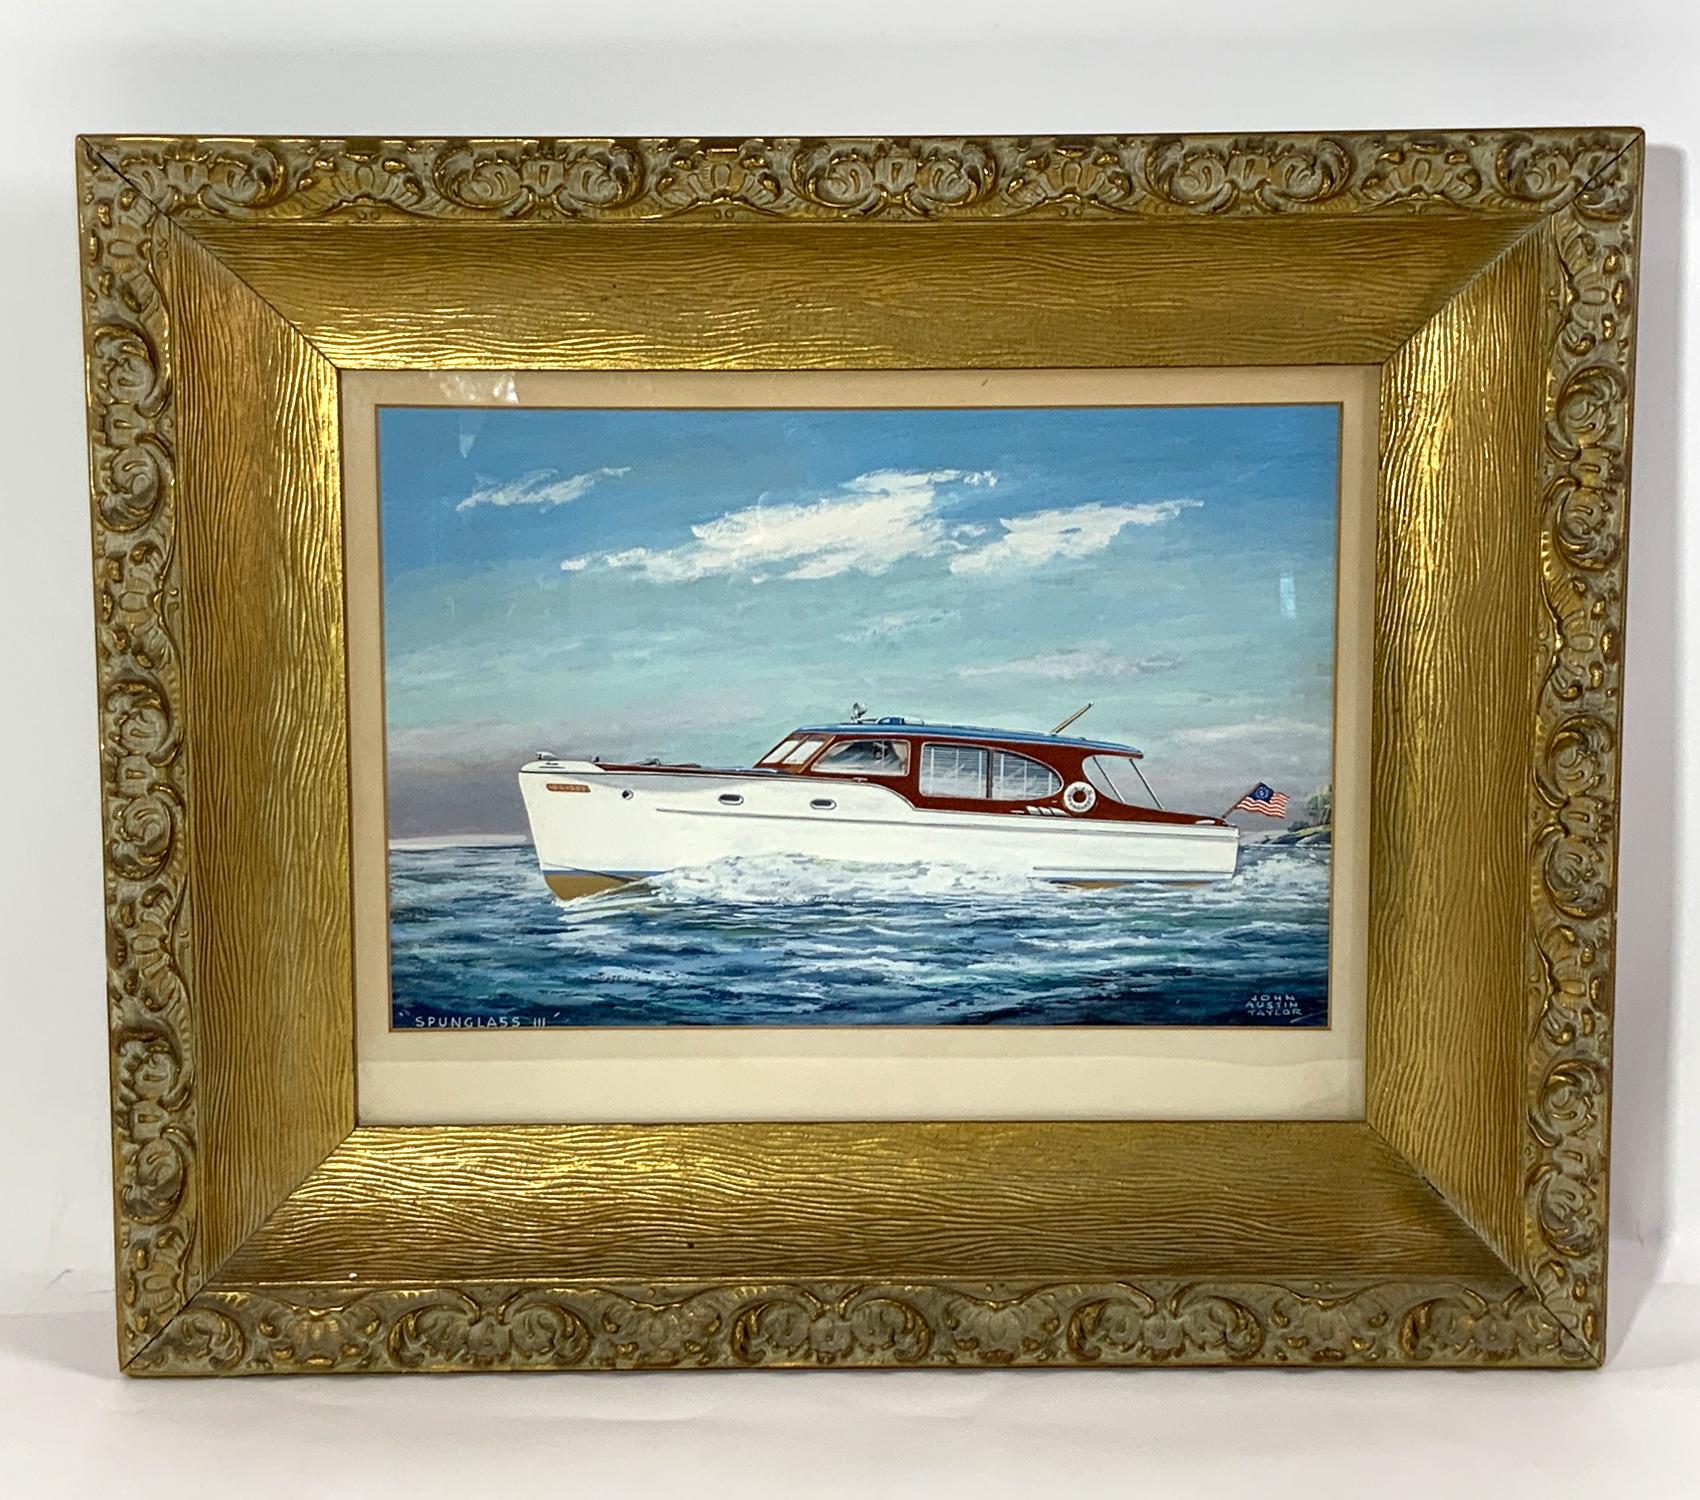 Framed yacht painting by noted illustrator Jan Austin Taylor. This gouache shows the boat cruising through calm seas with her captain at the helm. Vessel is flying a yacht ensign astern. A life ring is attached to the cabin. Circa 1940.